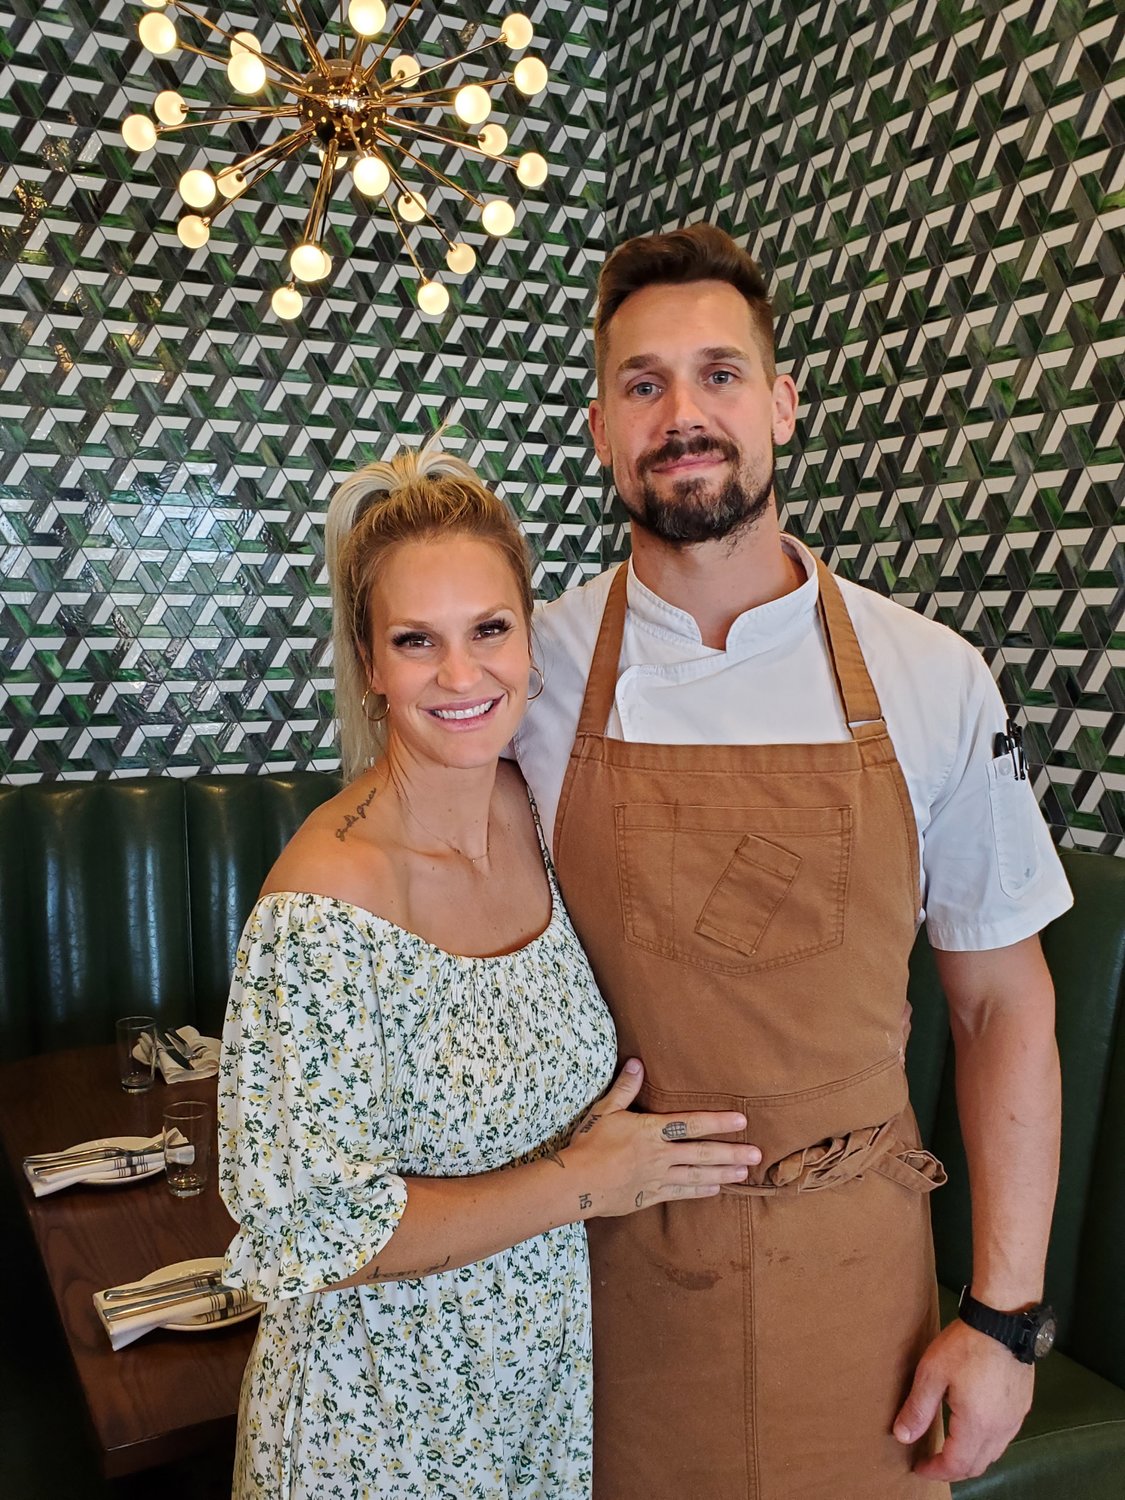 Brittany and Chef Mike Cooney opened Ember & Iron last year.